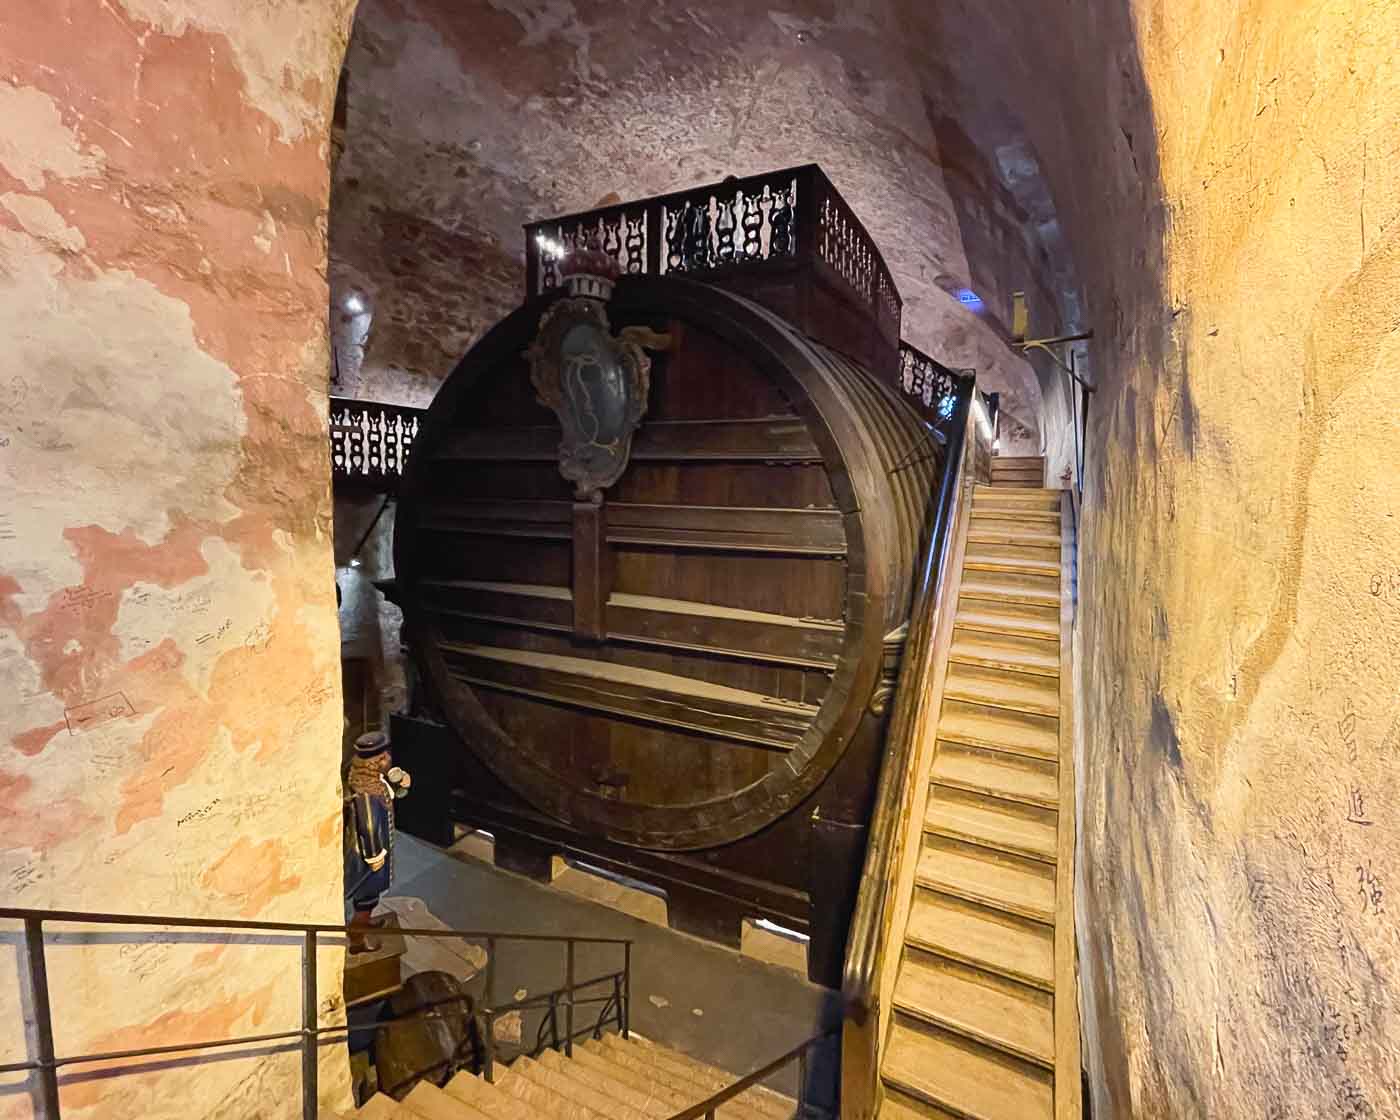 Inside the Heidelberg Castle, you must venture into its ruins to encounter the Heidelberg Tun, an awe-inspiring testament to the region’s winemaking legacy. This colossal wine barrel, constructed in 1751, could hold over 58,000 gallons of wine. However, it primarily served as a symbol of wealth and power. 